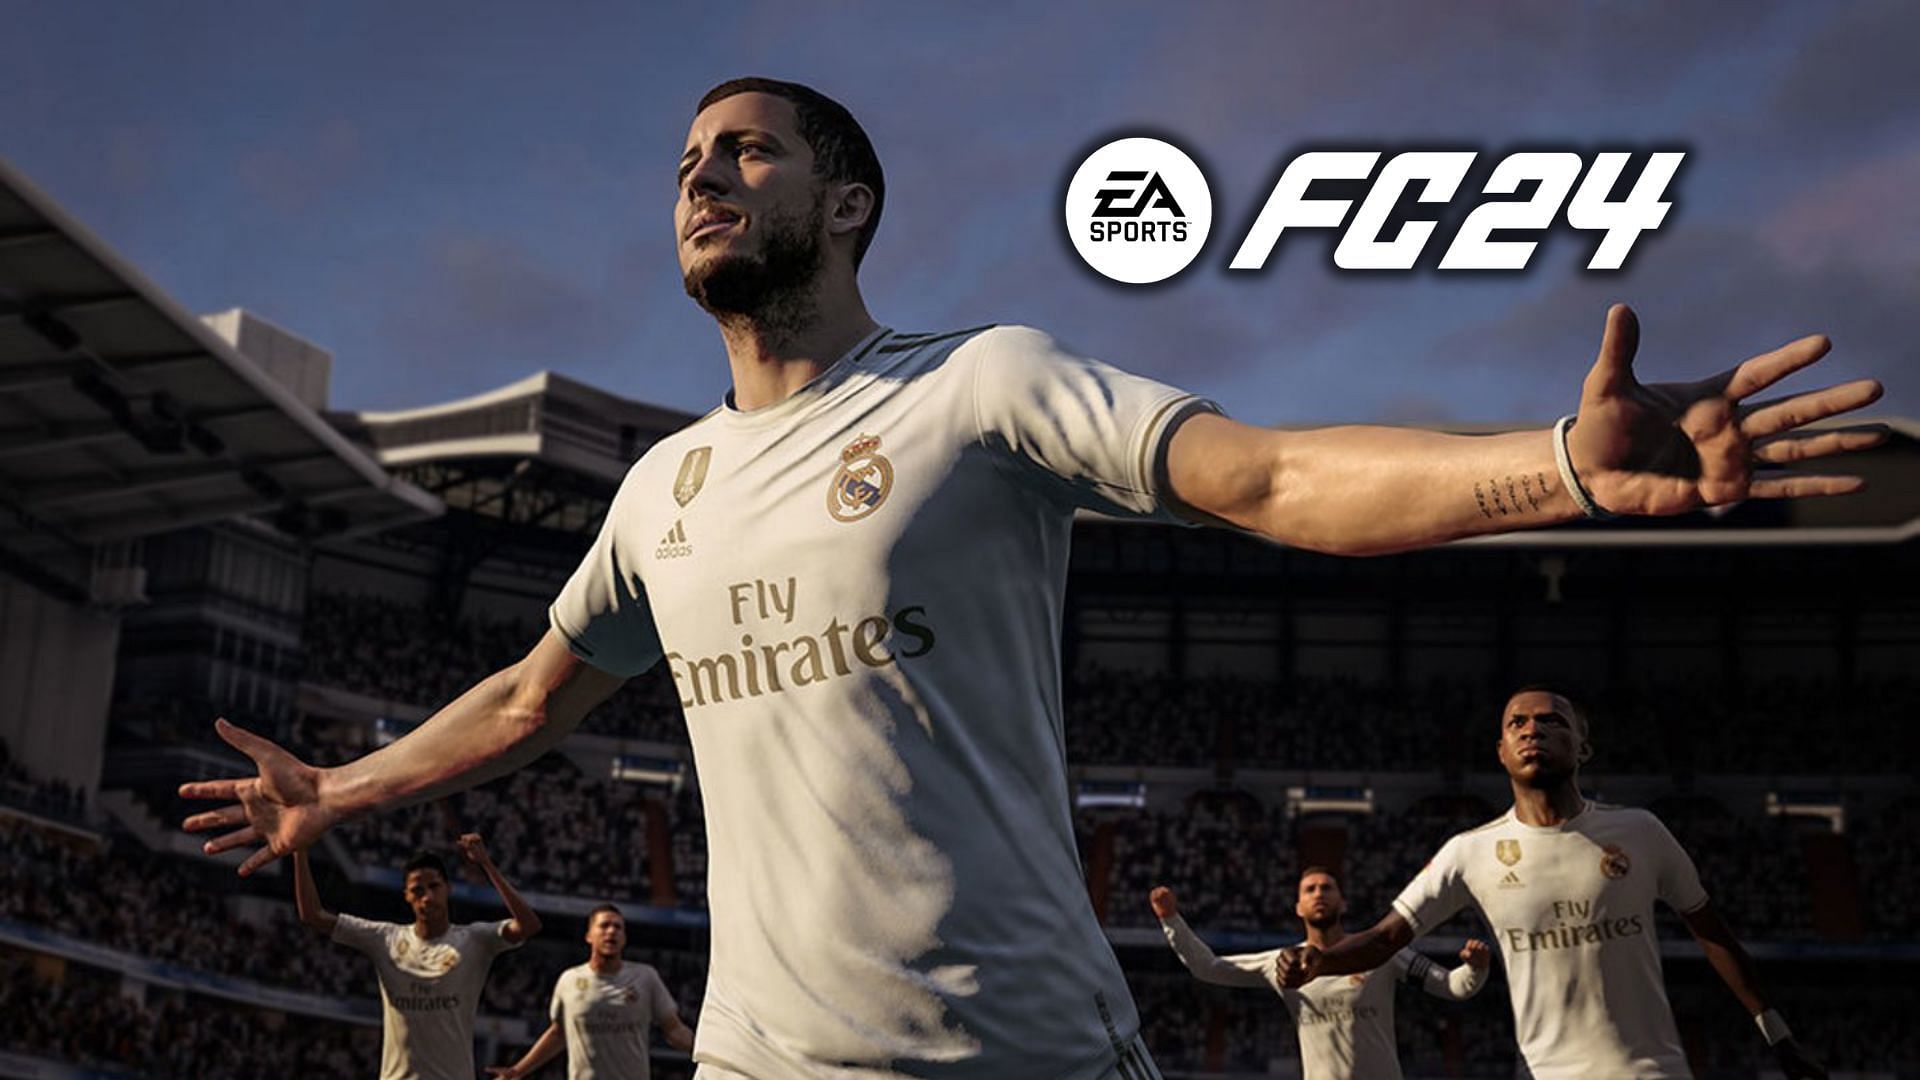 Best EA FC 24 camera settings for Ultimate Team, Career Mode, and Pro Clubs